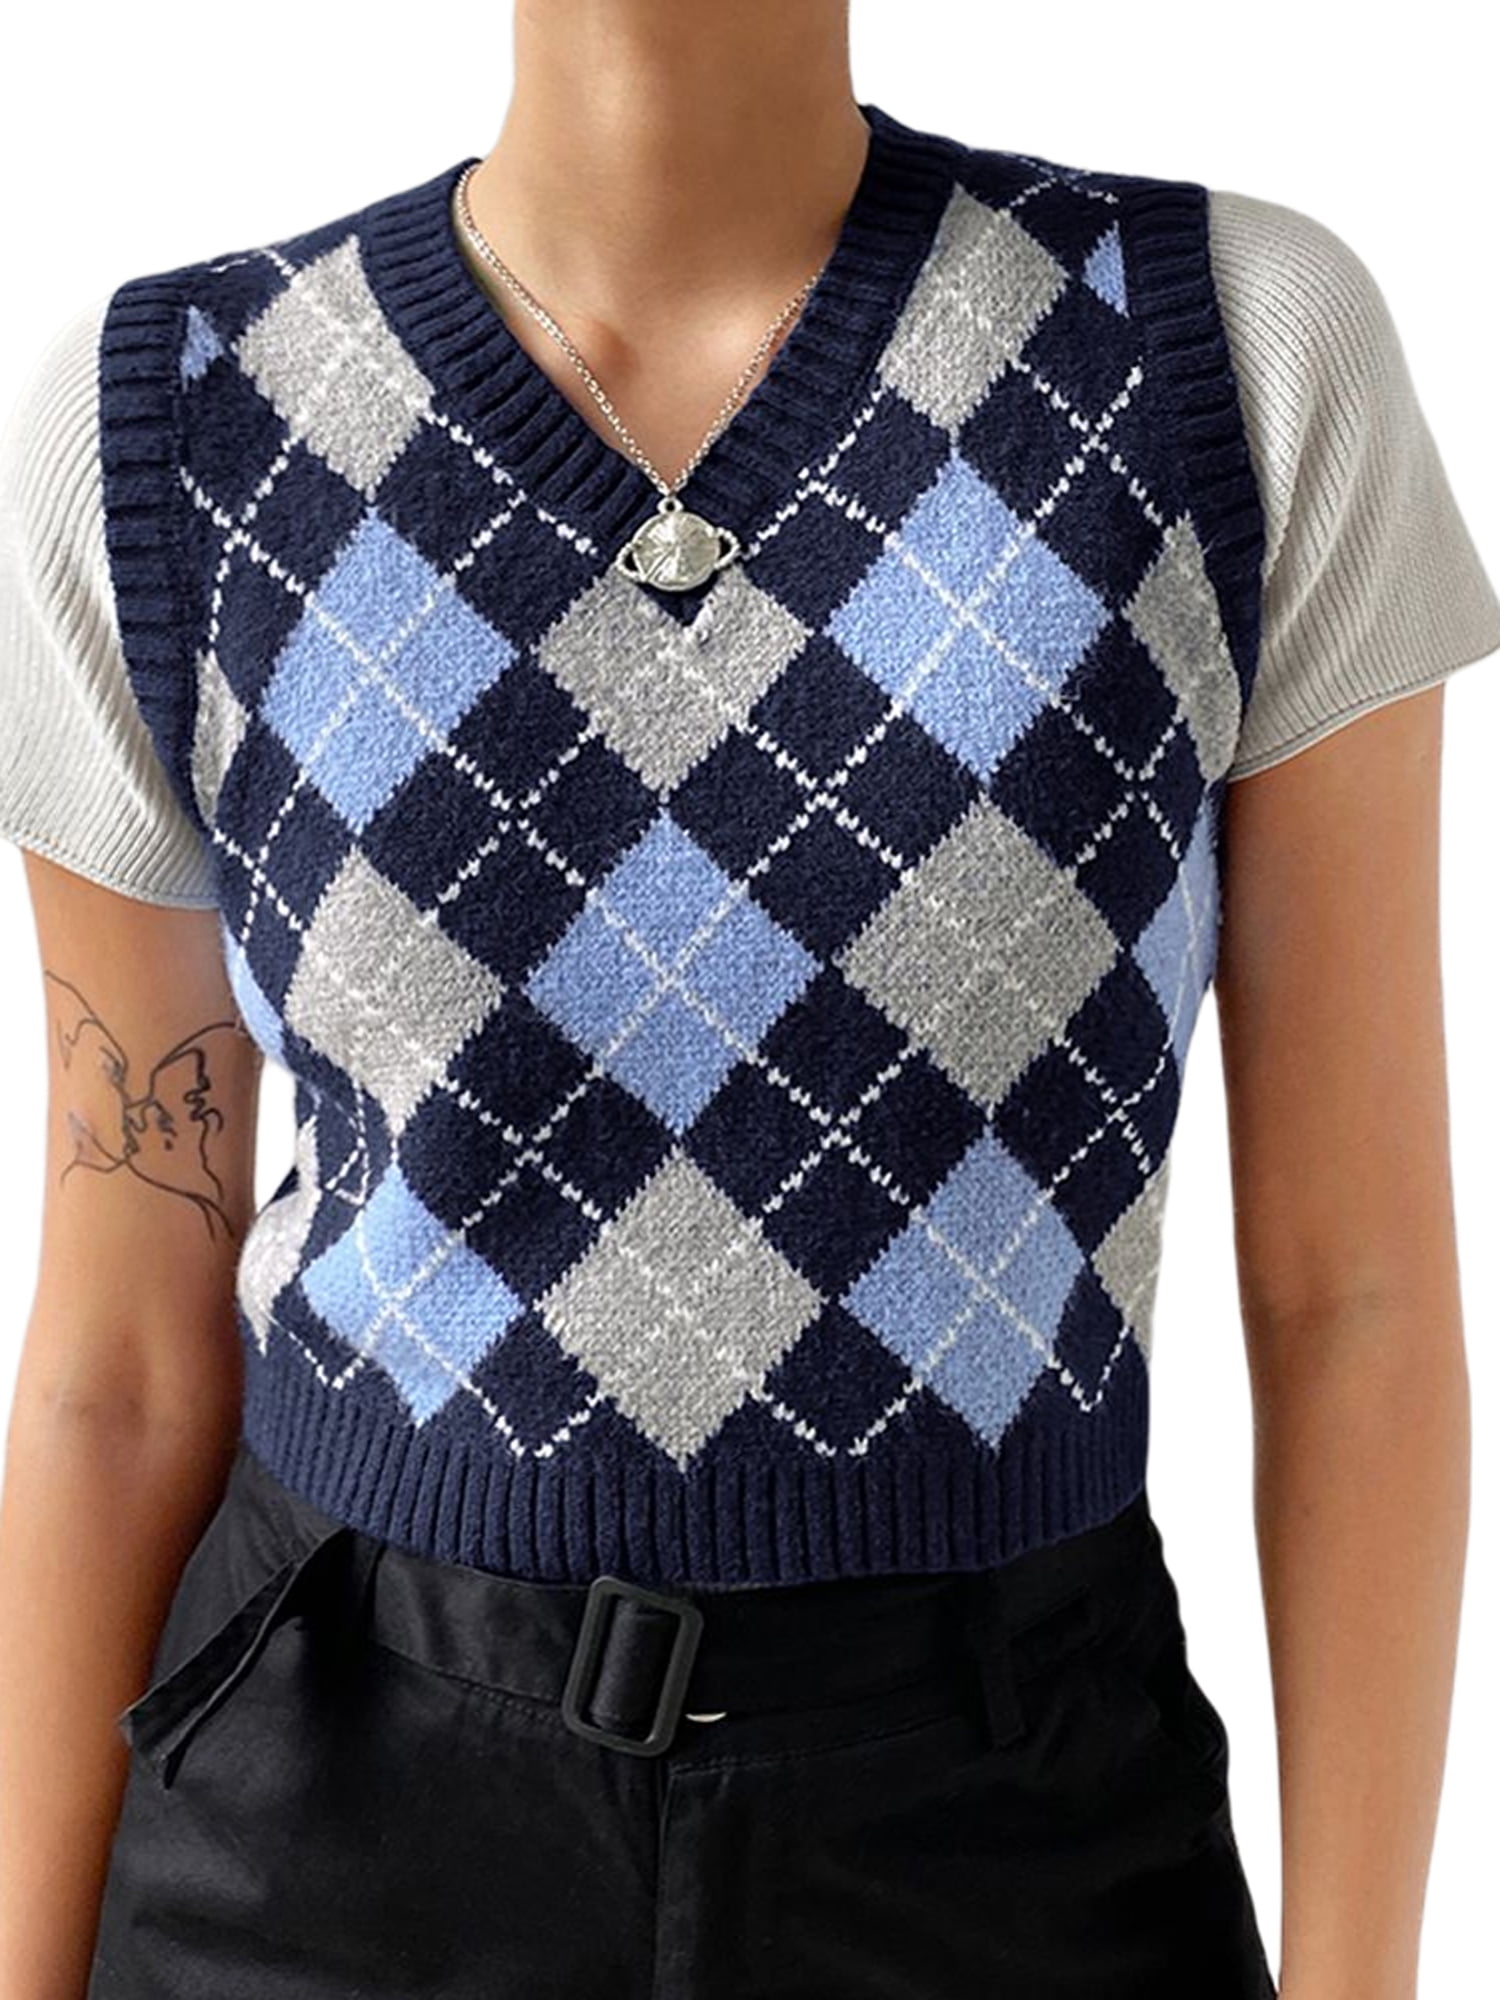 Plaid Knitted Button Sweater Vest Female Style Y2K Clothes V Neck Casual 90s Knitwear